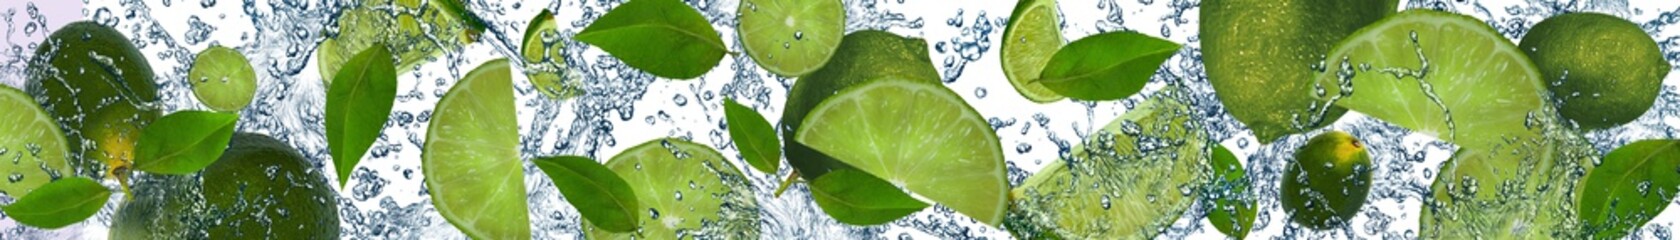 Limes in the water